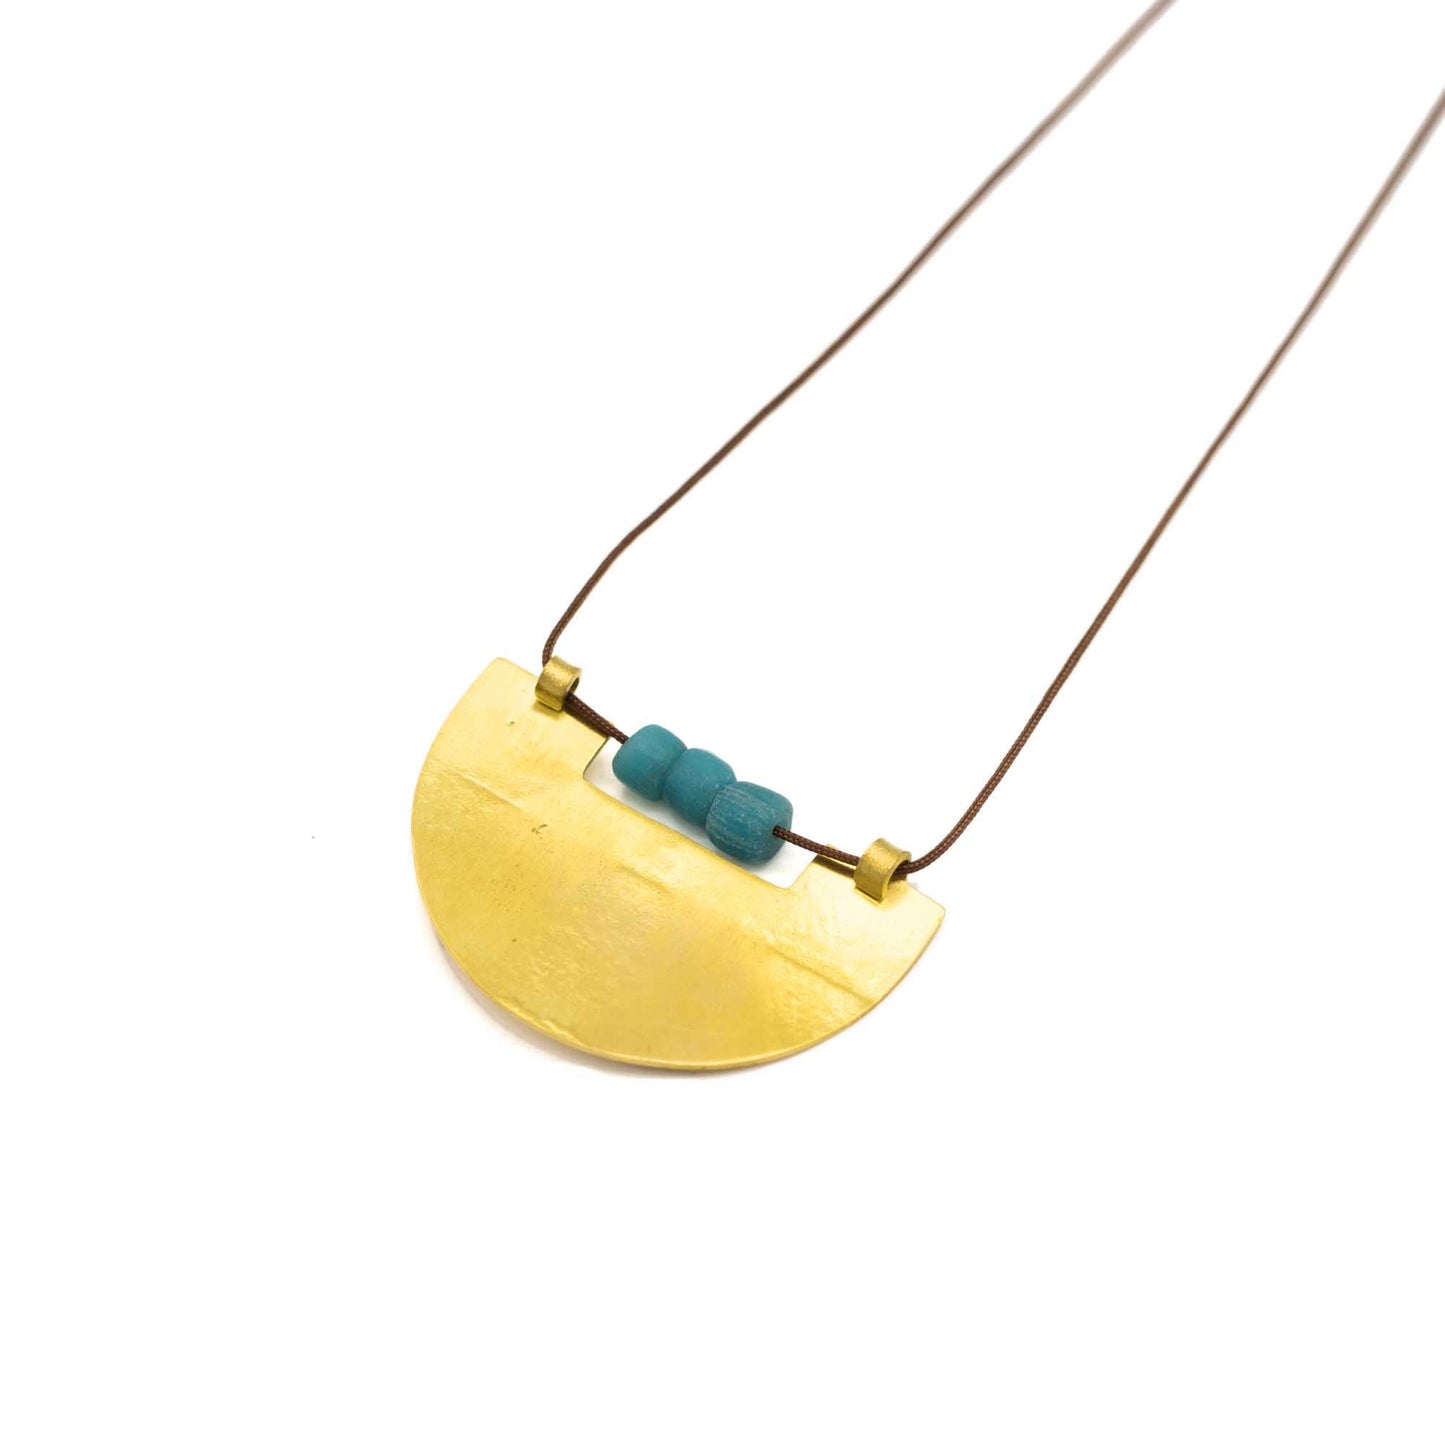 Brass semi-circle pendant with a cutout on the flat top to accommodate three turquoise glass beads. Brown string and presented at an angle against a white background.